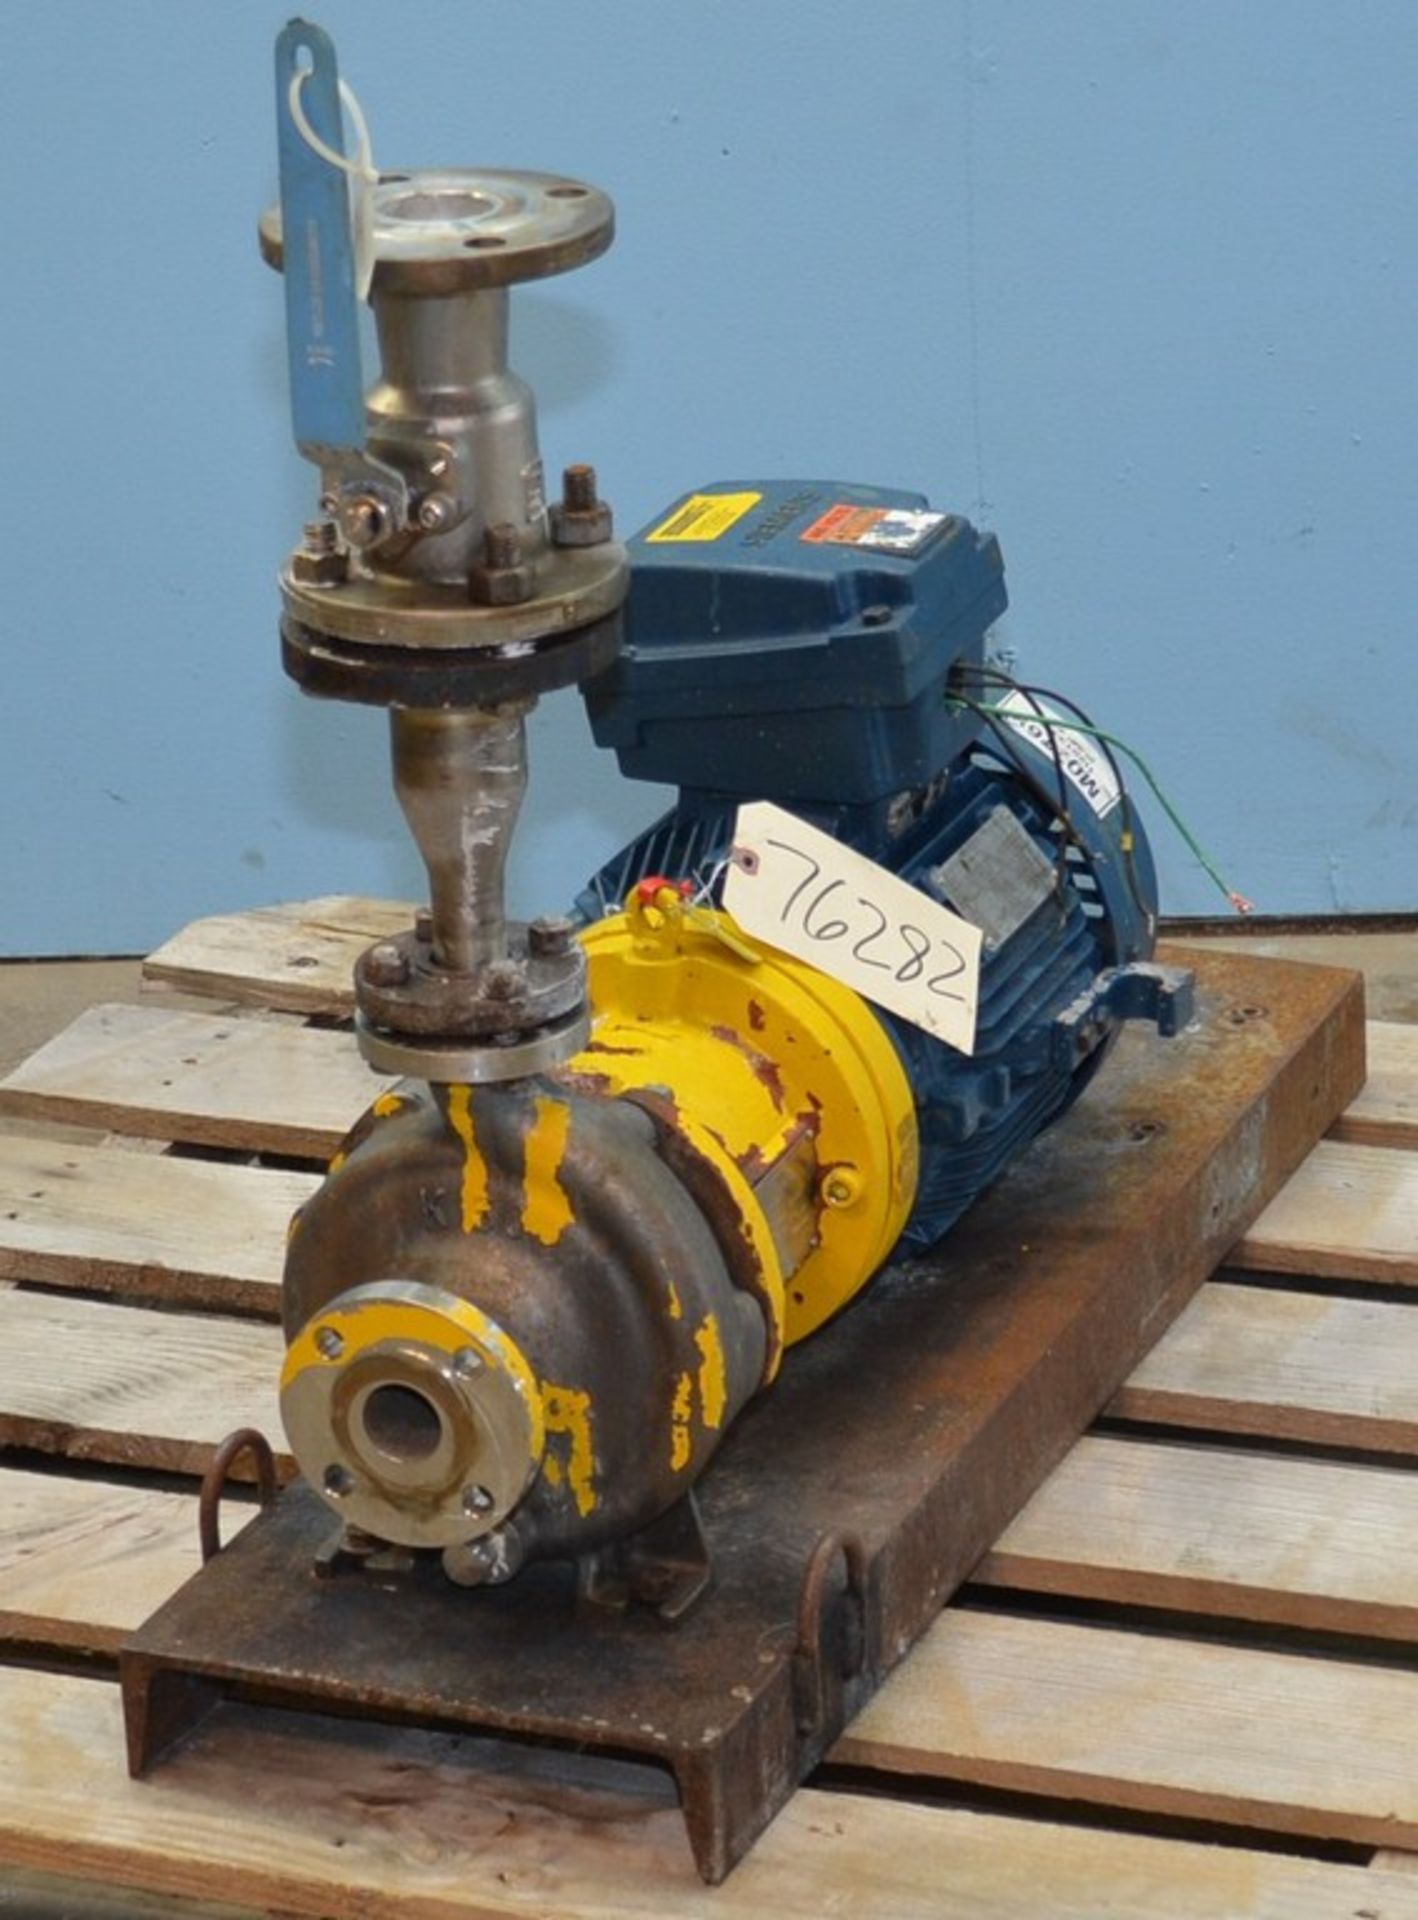 Kontro GSA 7.5 HP 316 S/S Centrifugal Pump. Size 1.5 x 1 x 6. Approximately 60 Gallons Per Minute at